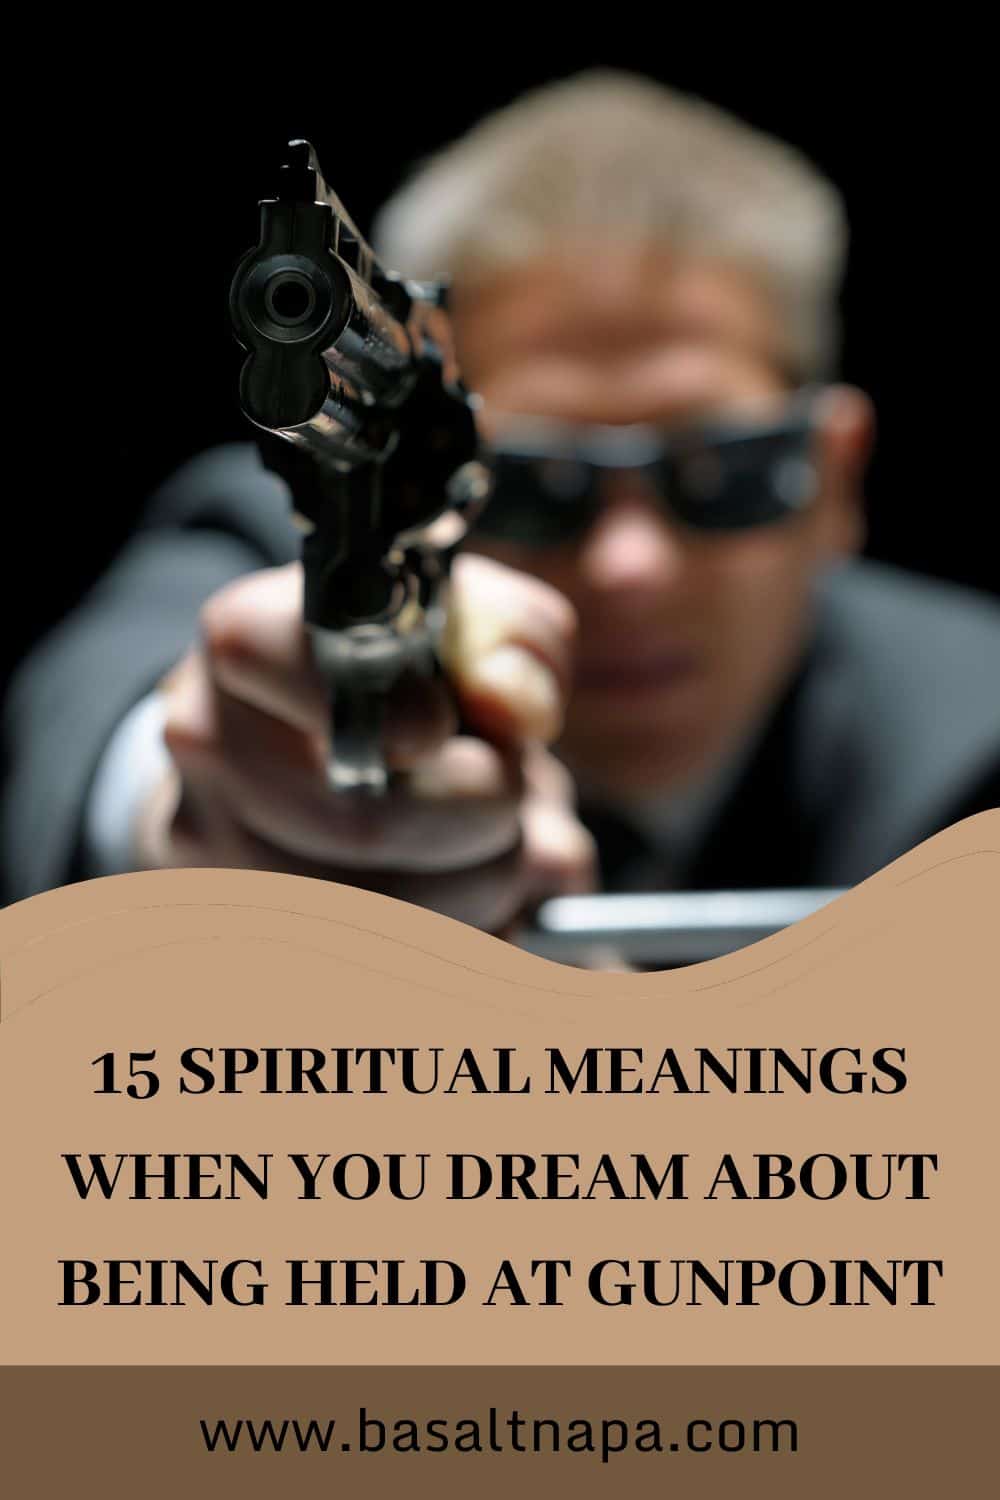 15 Spiritual Meanings When You Dream About Being Held at Gunpoint